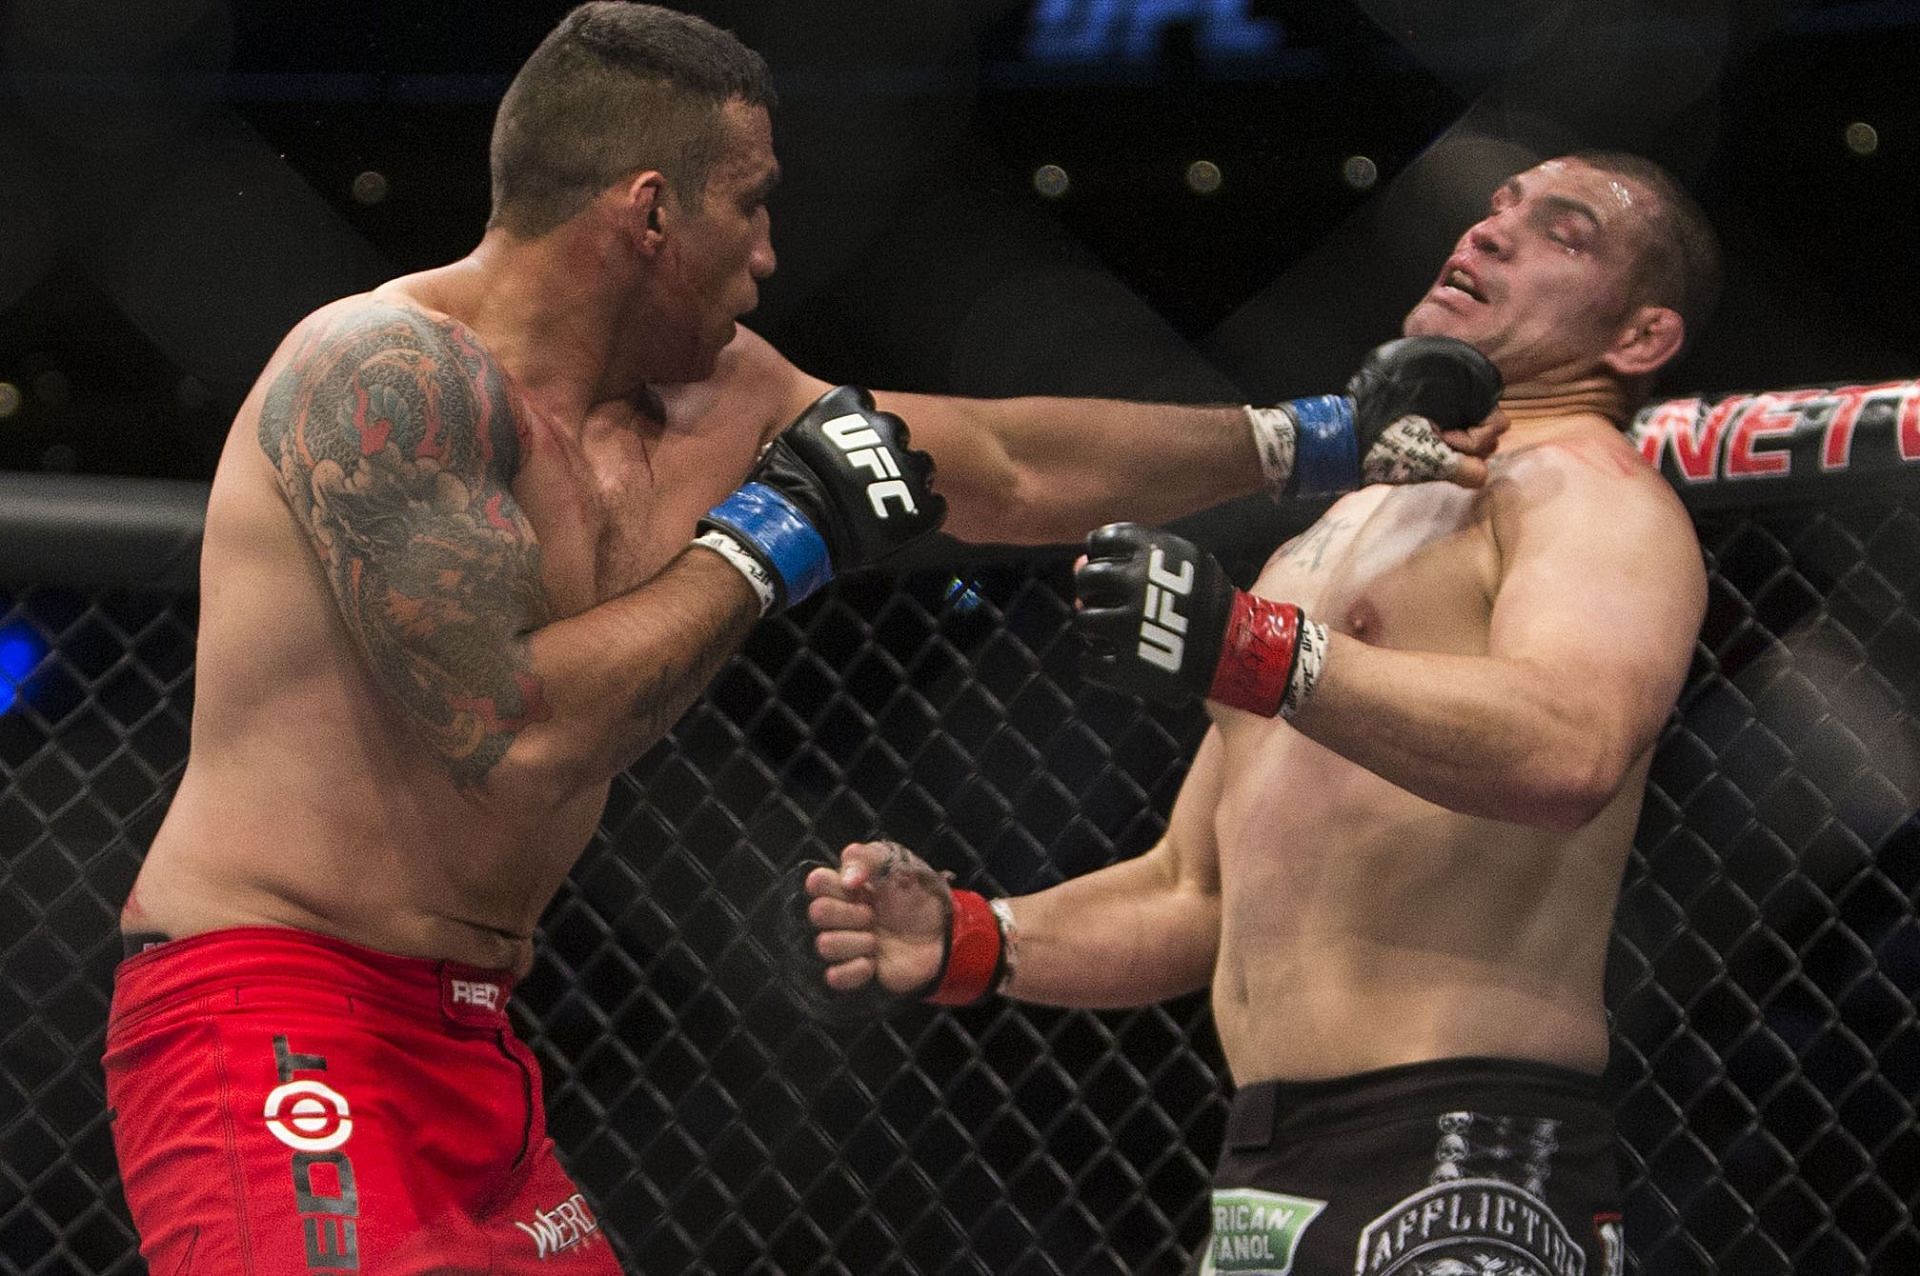 Fabricio Werdum stunned everyone by defeating Cain Velasquez for the undisputed UFC heavyweight title in 2015